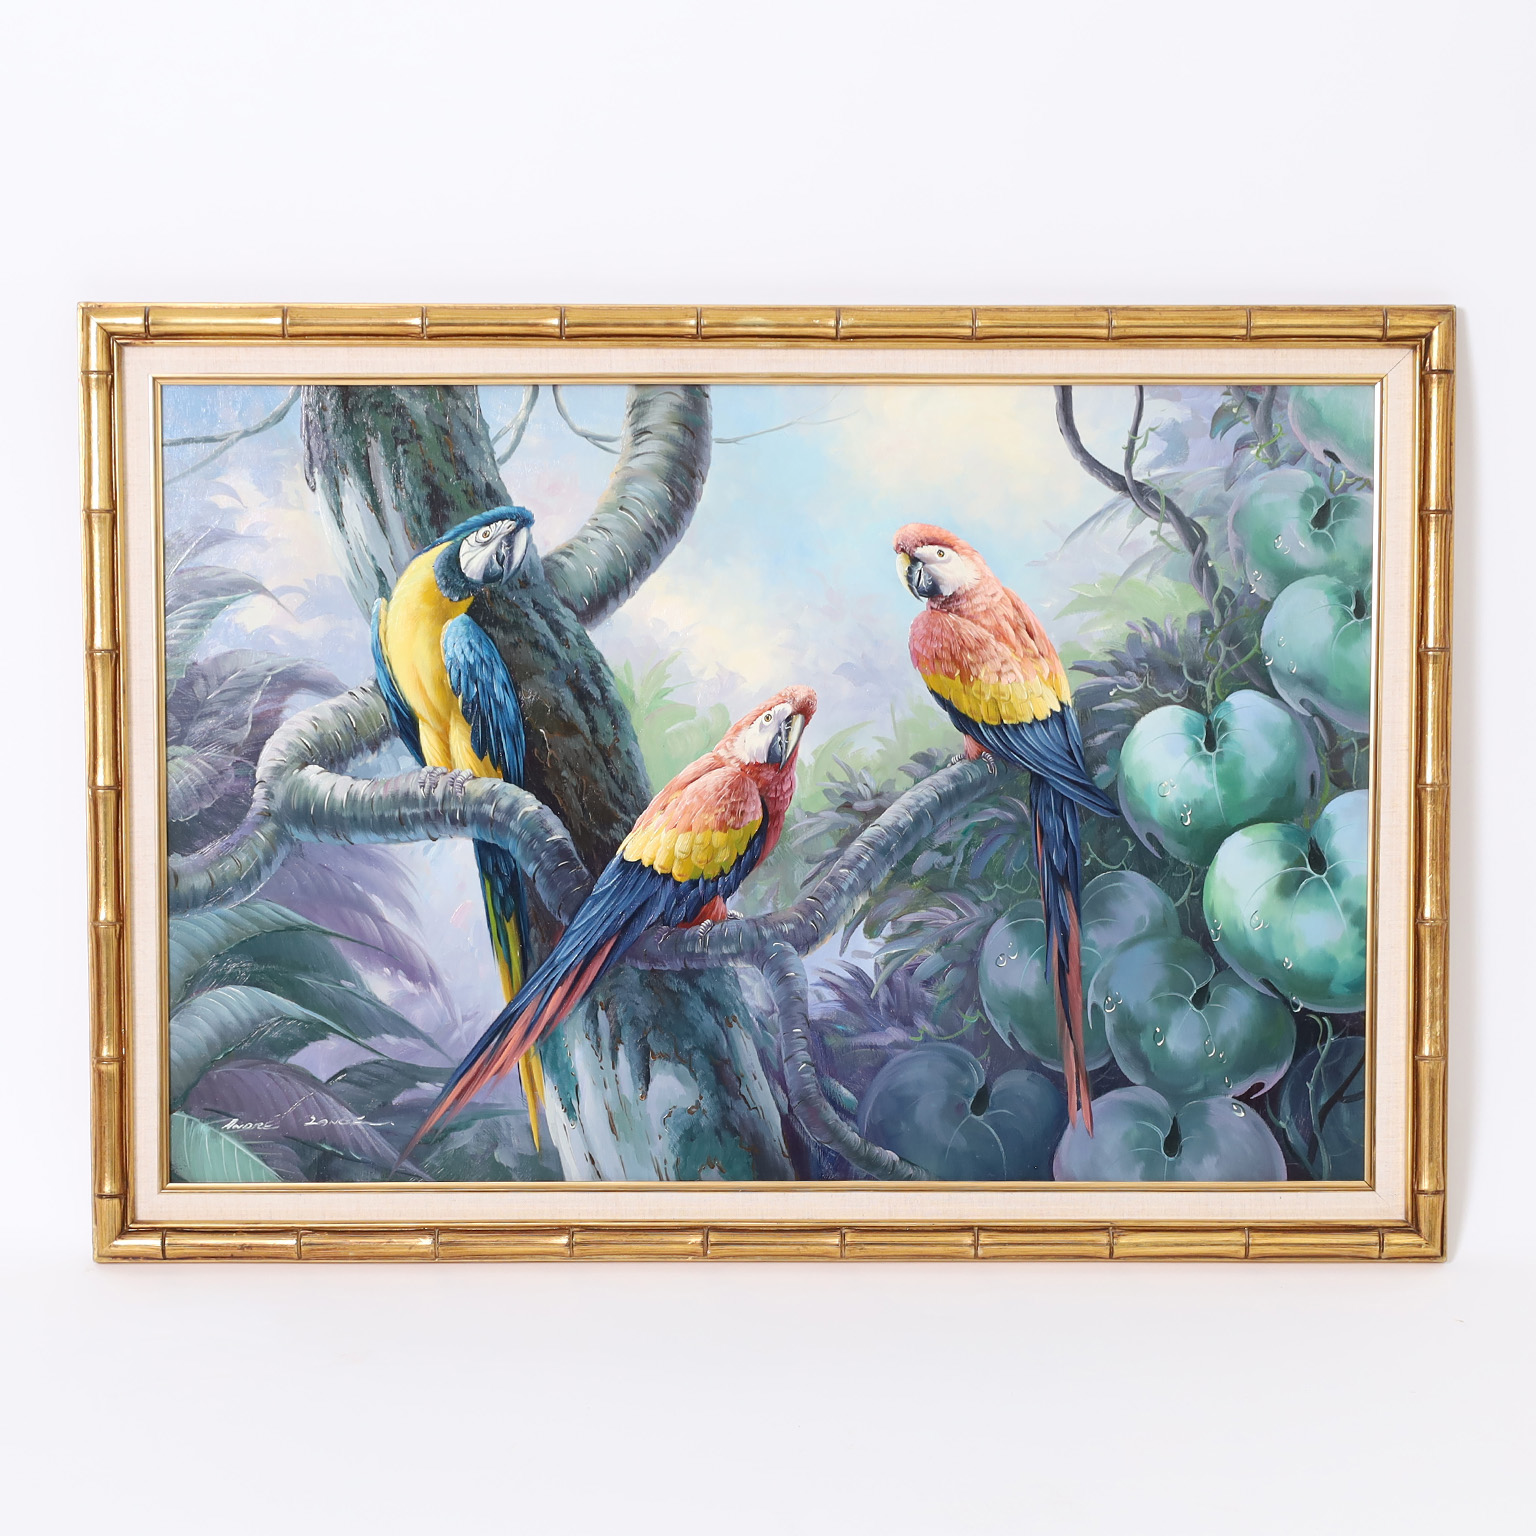 Oil Painting on Canvas of Parrots by Andre Lange